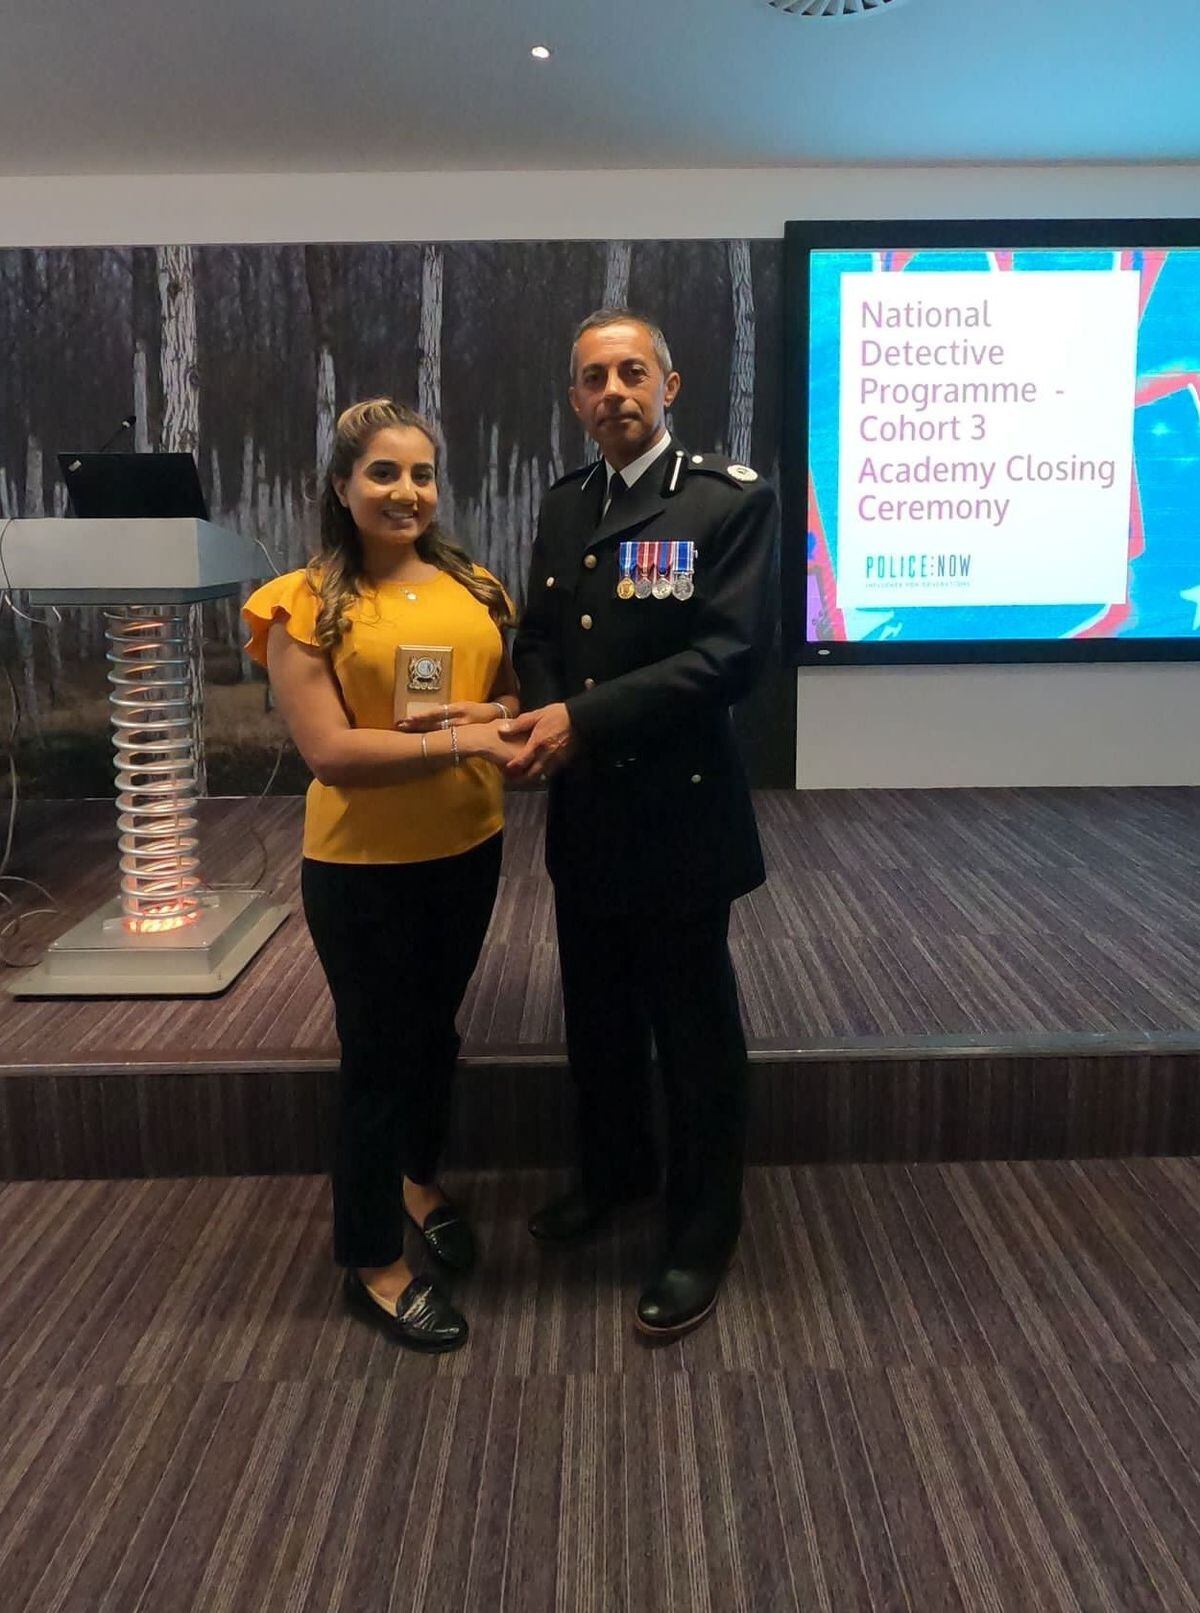 Neeya Gill with Bedfordshire Police Assistant Chief Constable Sharn Basra